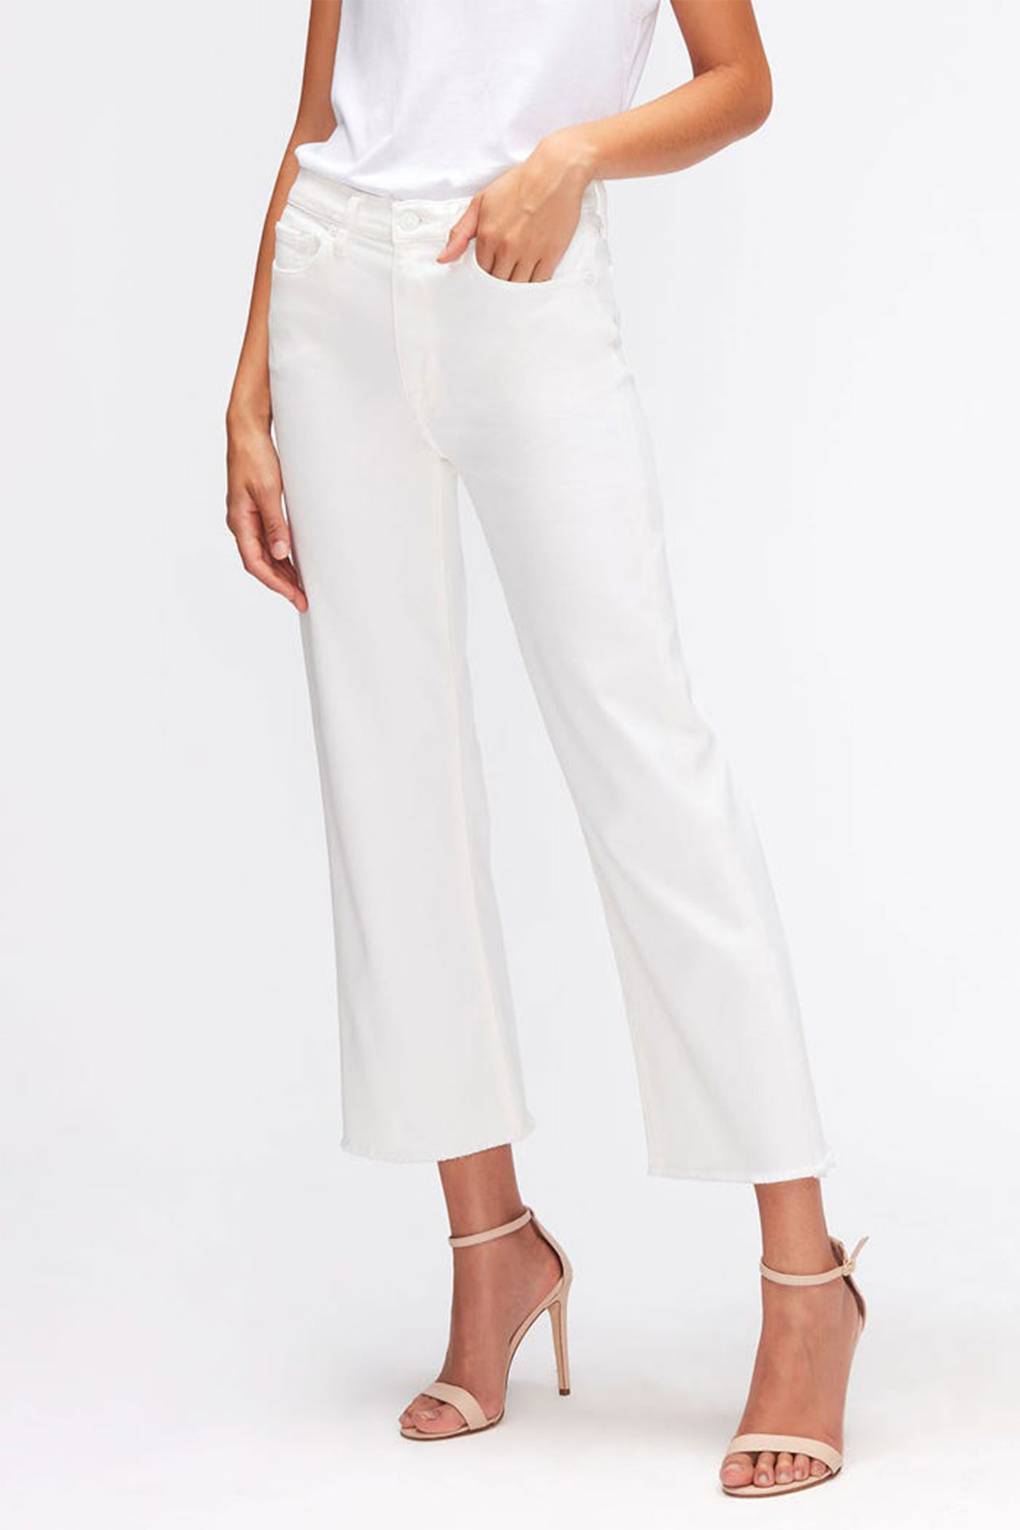 Best White Jeans 2021: High Waisted White Jeans, Cropped & Flared ...